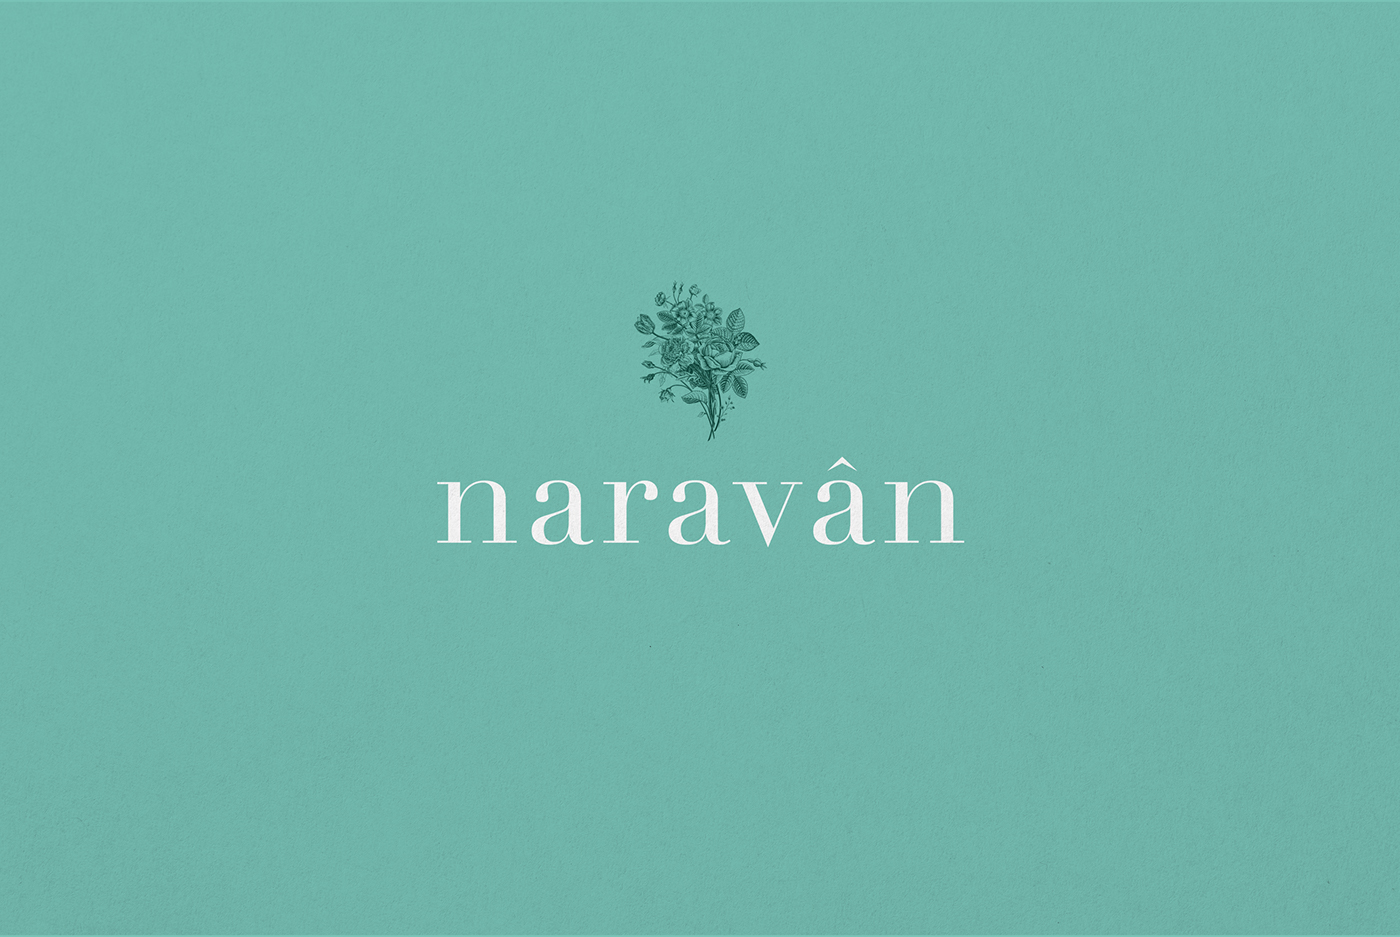 naraván package beauty care products Nature mexico skin care products skin care wordmark brand